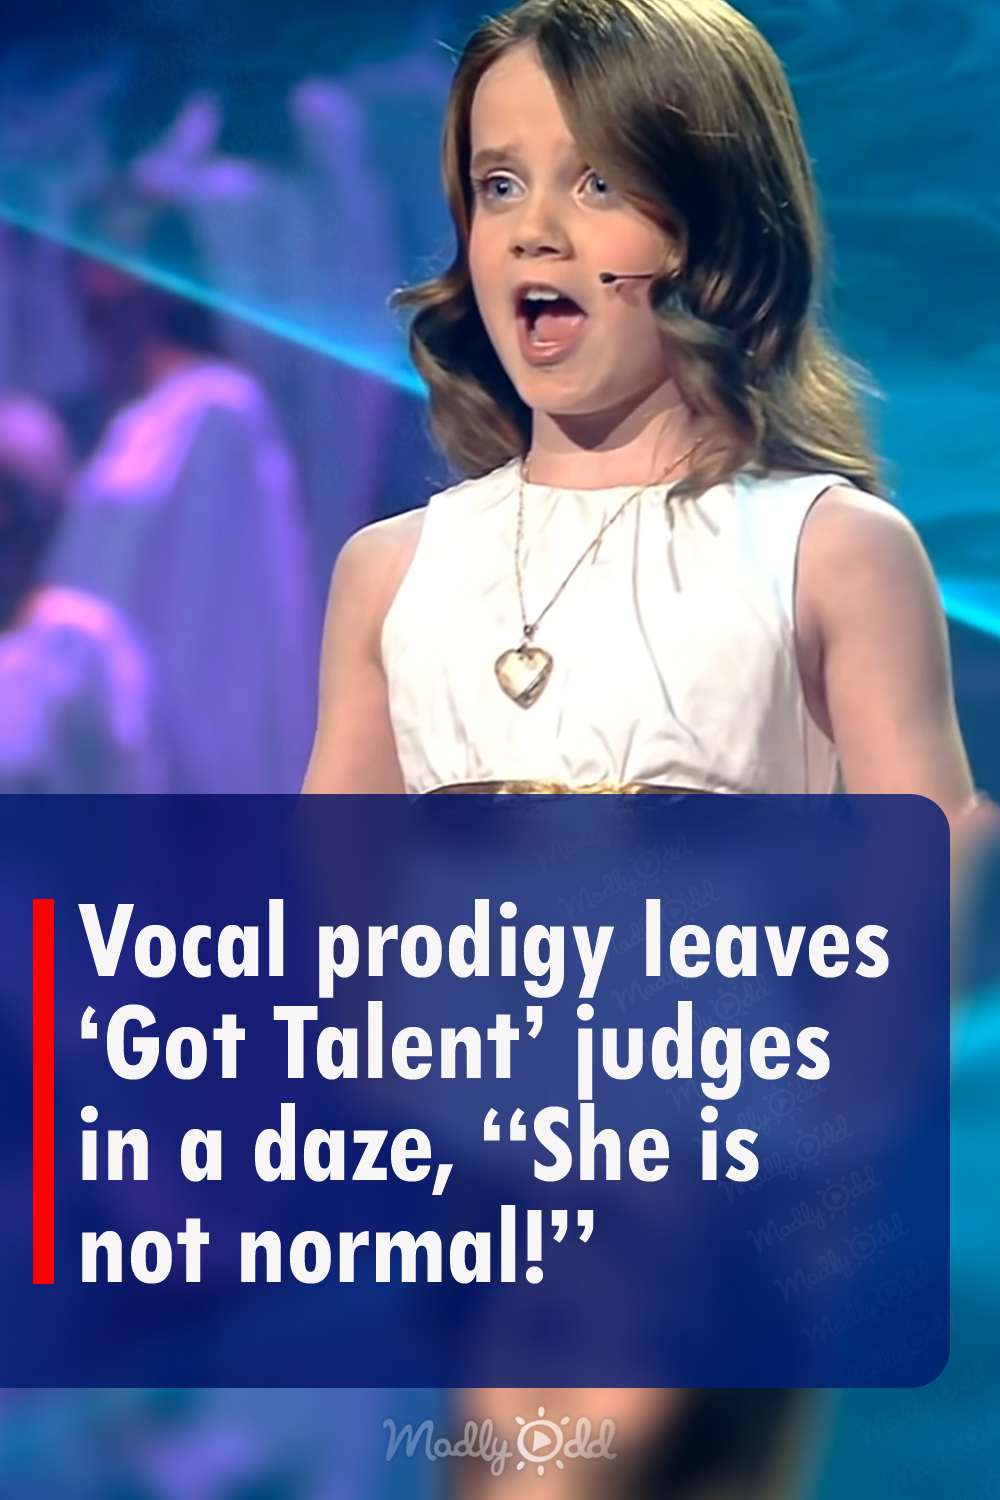 Vocal prodigy leaves \'Got Talent\' judges in a daze, \'\'She is not normal!\'\'